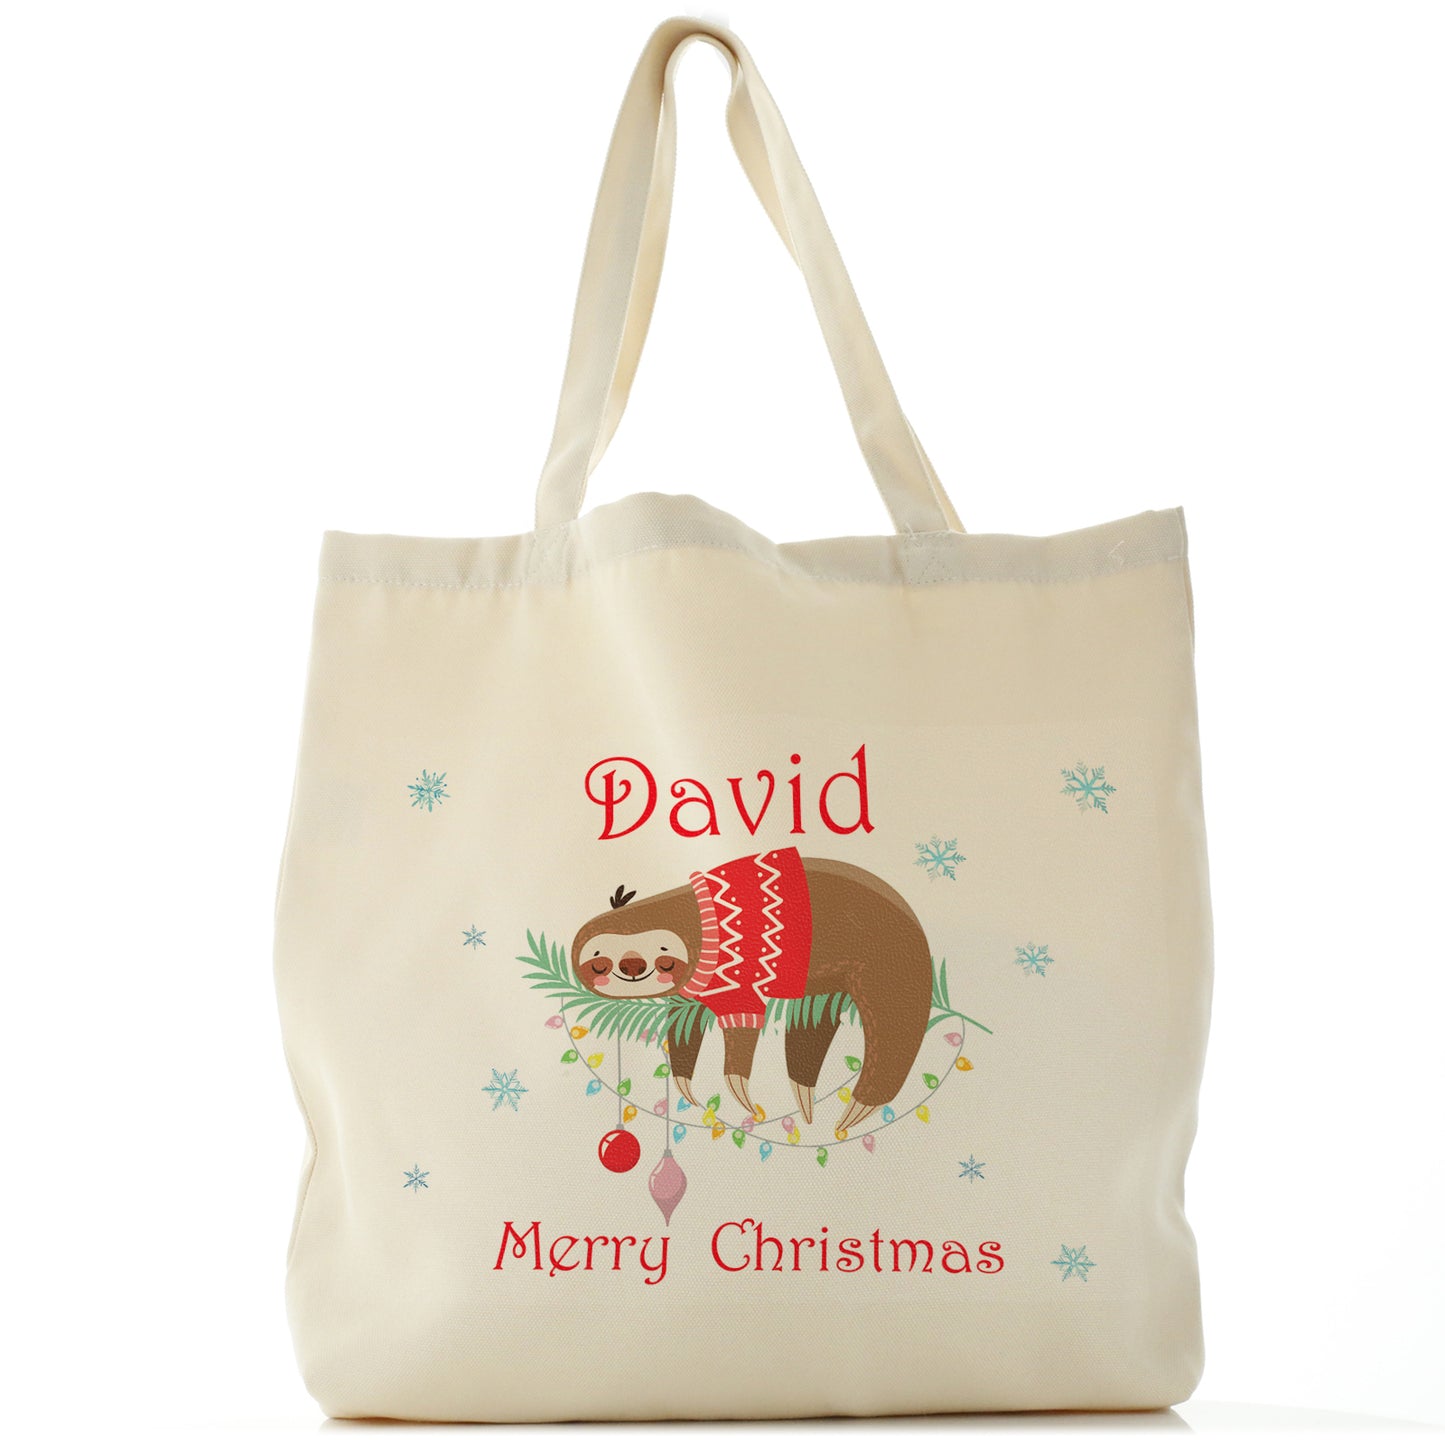 Personalised Canvas Tote Bag with Festive Text and Sleeping Christmas Sloth